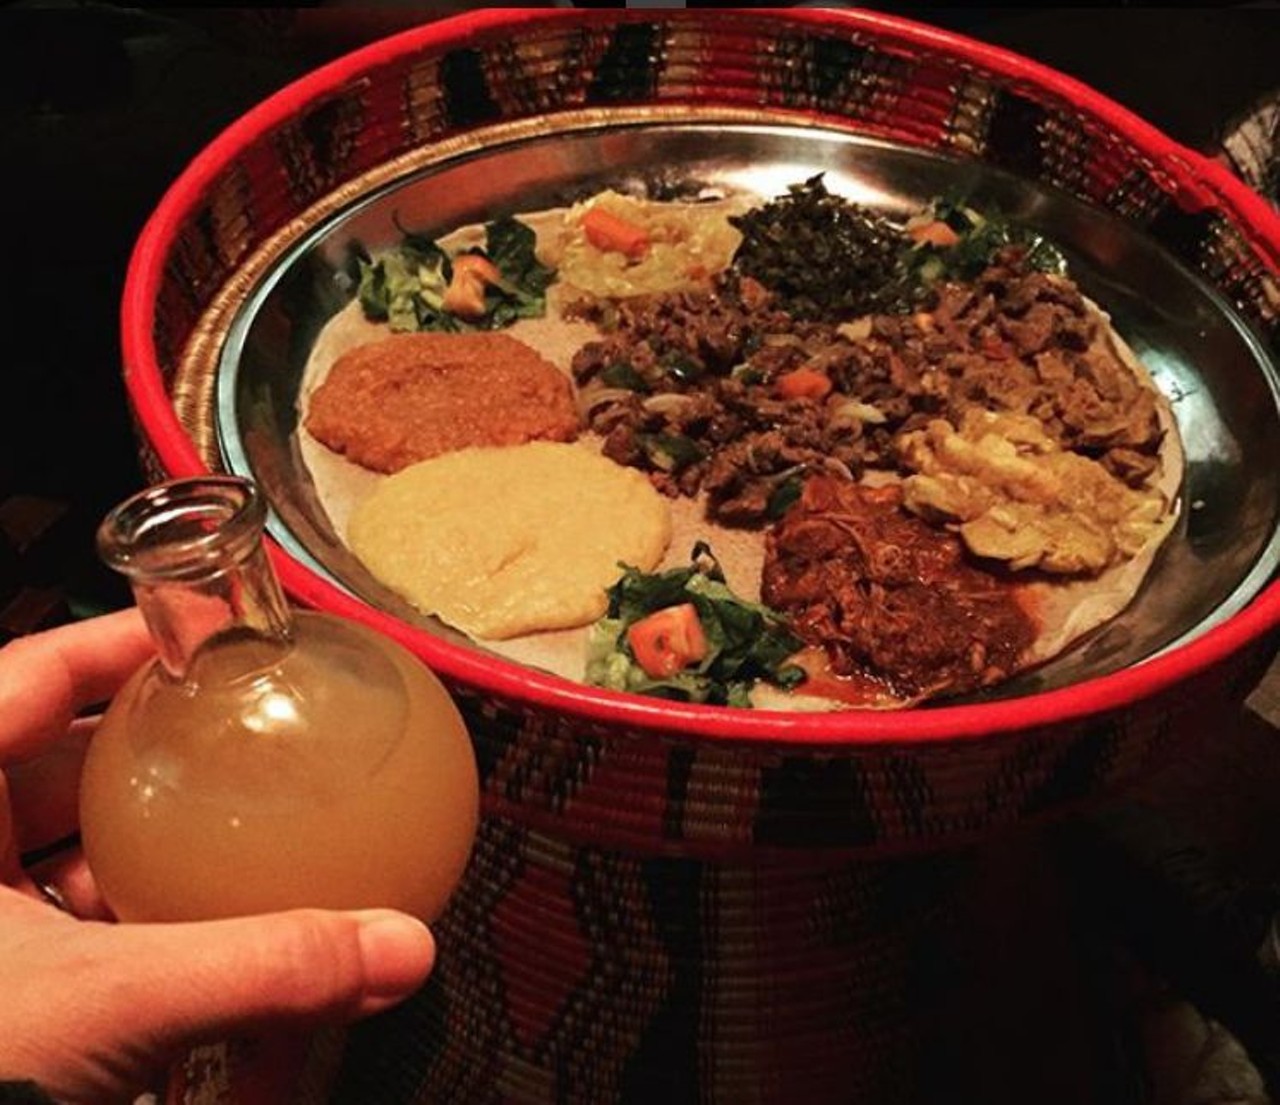 Nile Ethiopian Restaurant Orlando  
7048 International Drive, 407-354-0026
It's Orlando's only Ethiopian restaurant. This is the place to try dishes like wat and injera, and also mead (honey wine) and an awesome special coffee service.
Photo via jujubee99/ Instagram